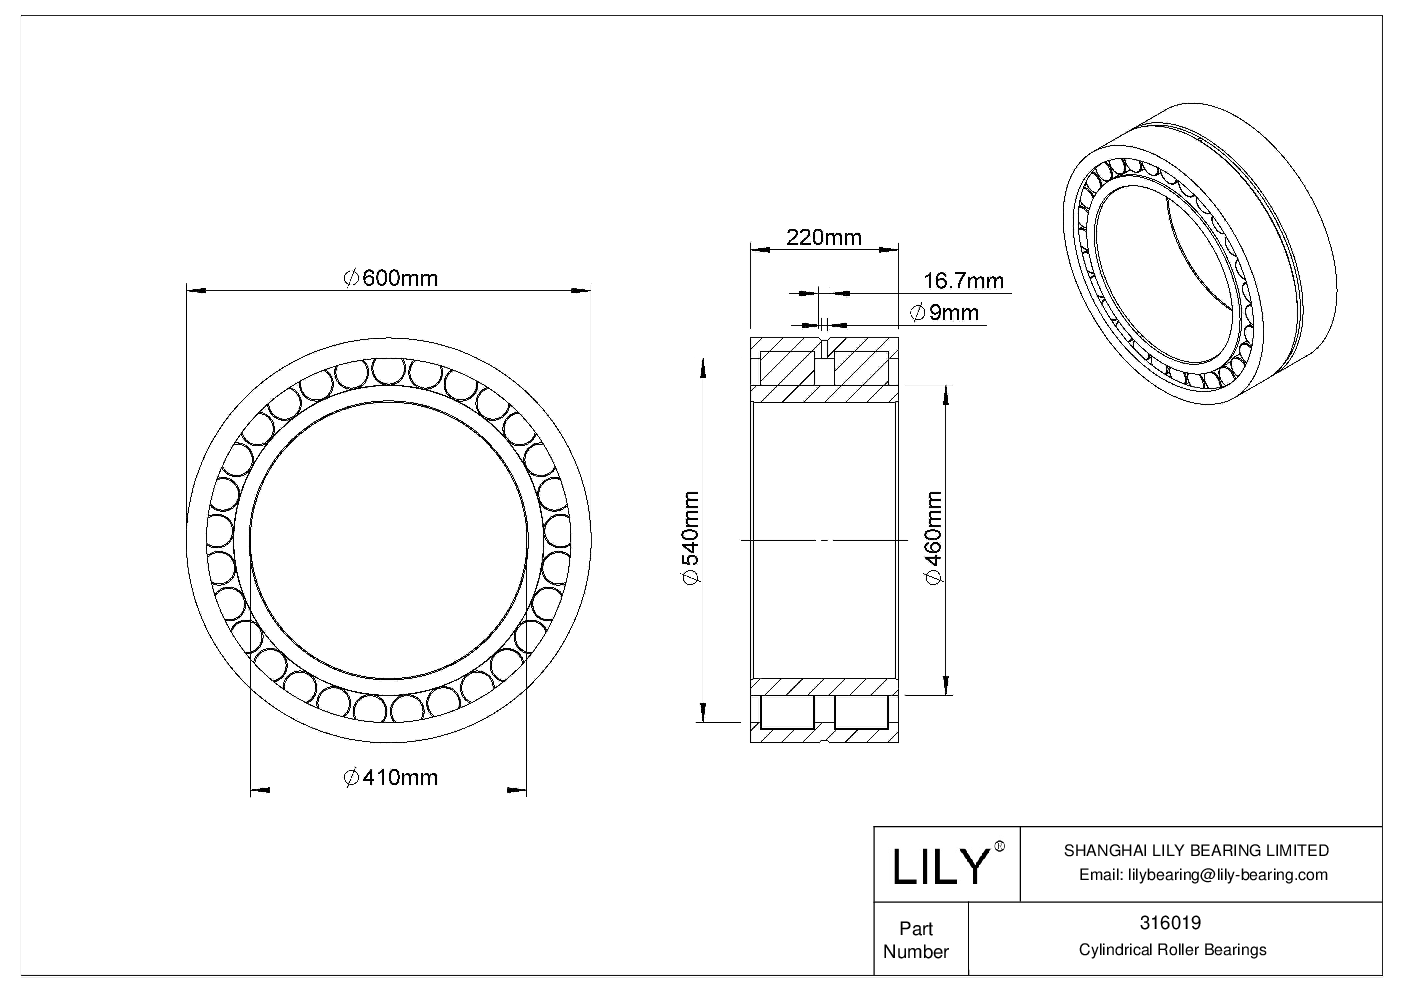 316019 Double Row Cylindrical Roller Bearings cad drawing